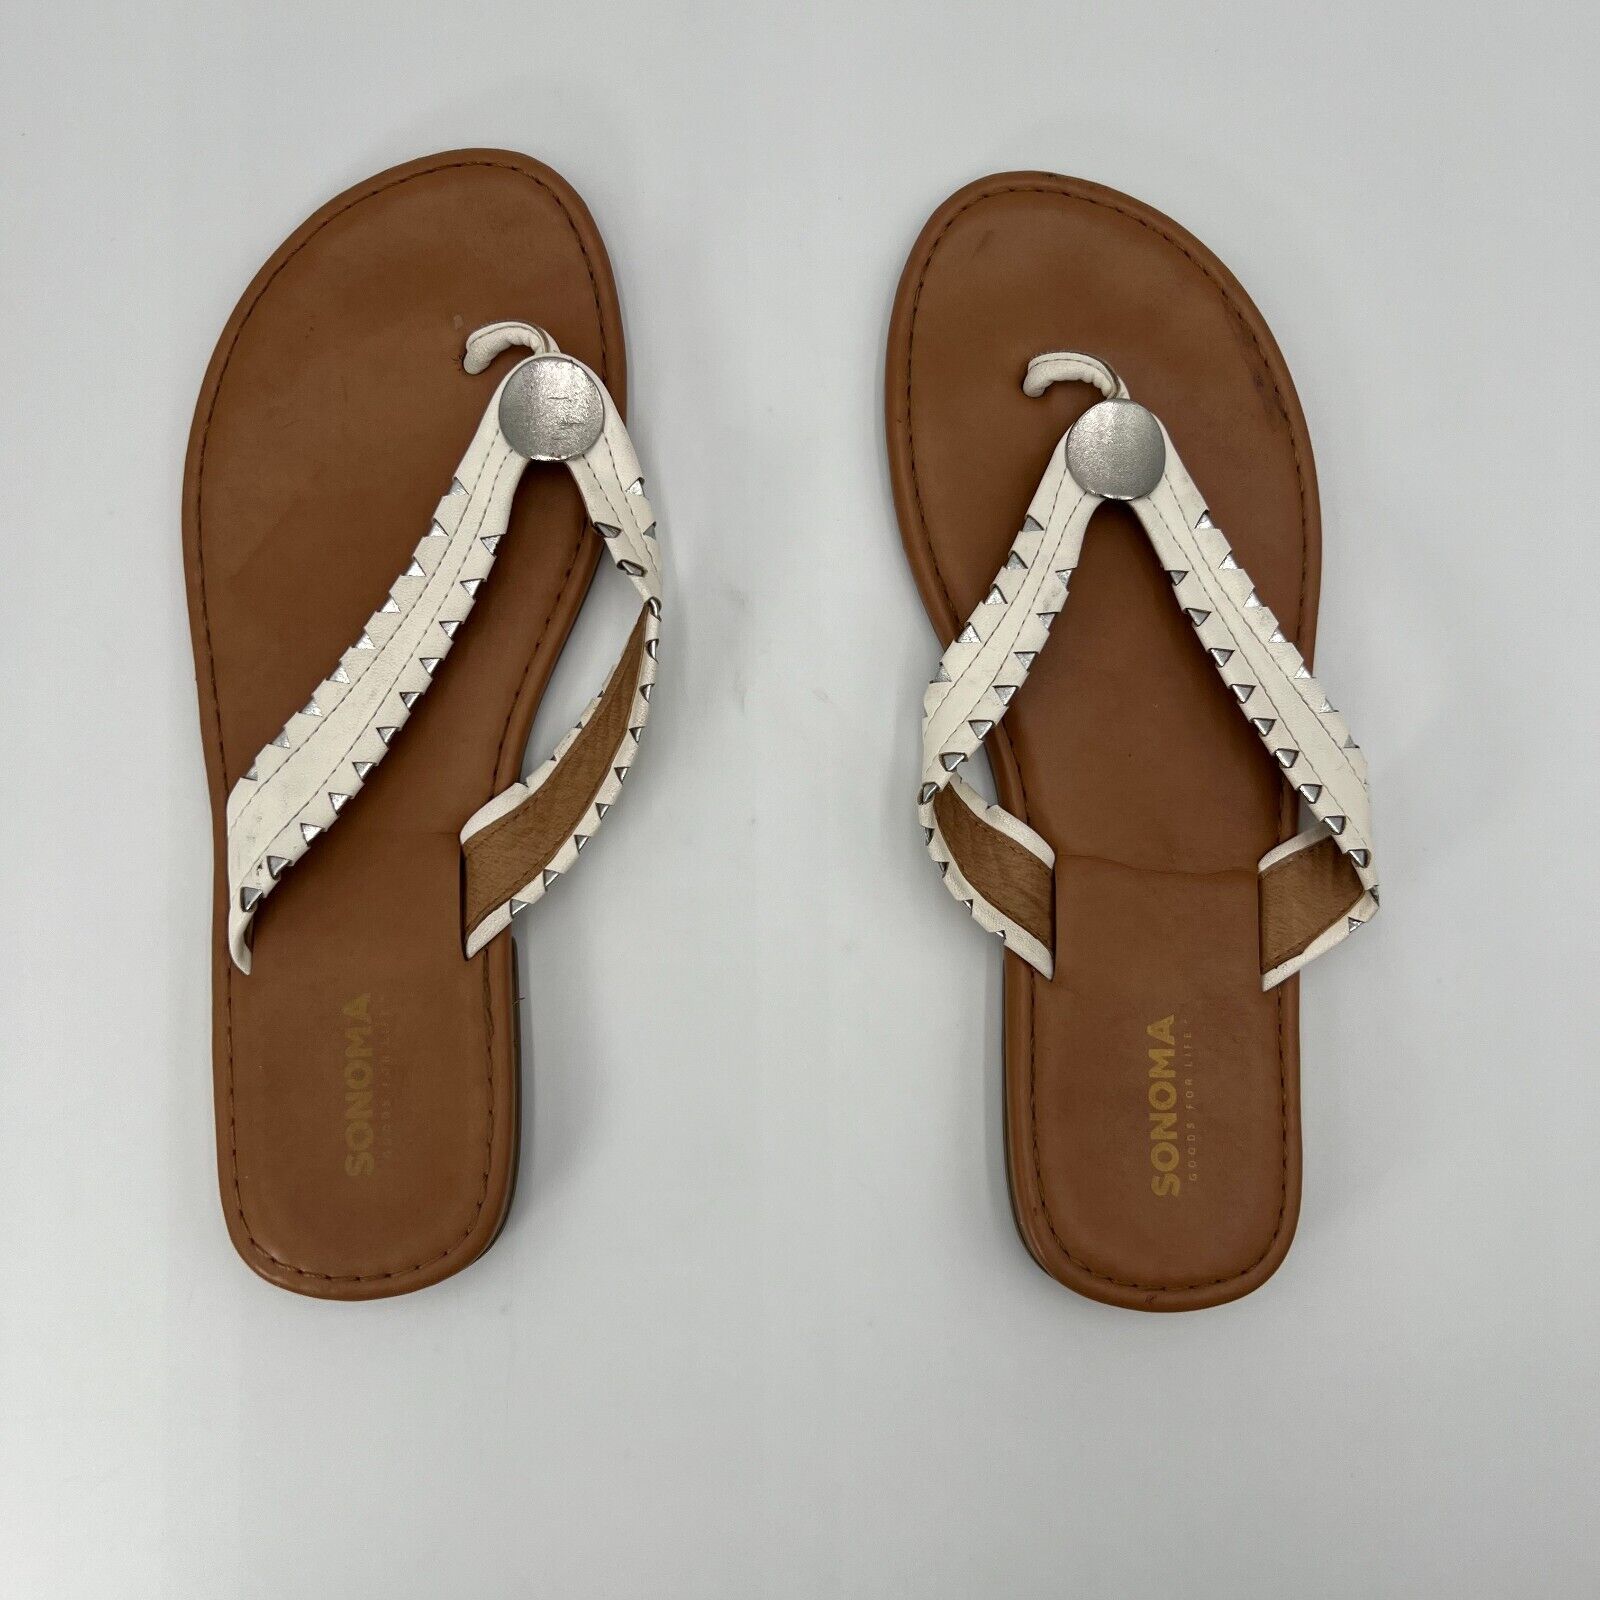 Sonoma Goods For Life Sandal Thongs White Silver Tan Flats Womens Size 8